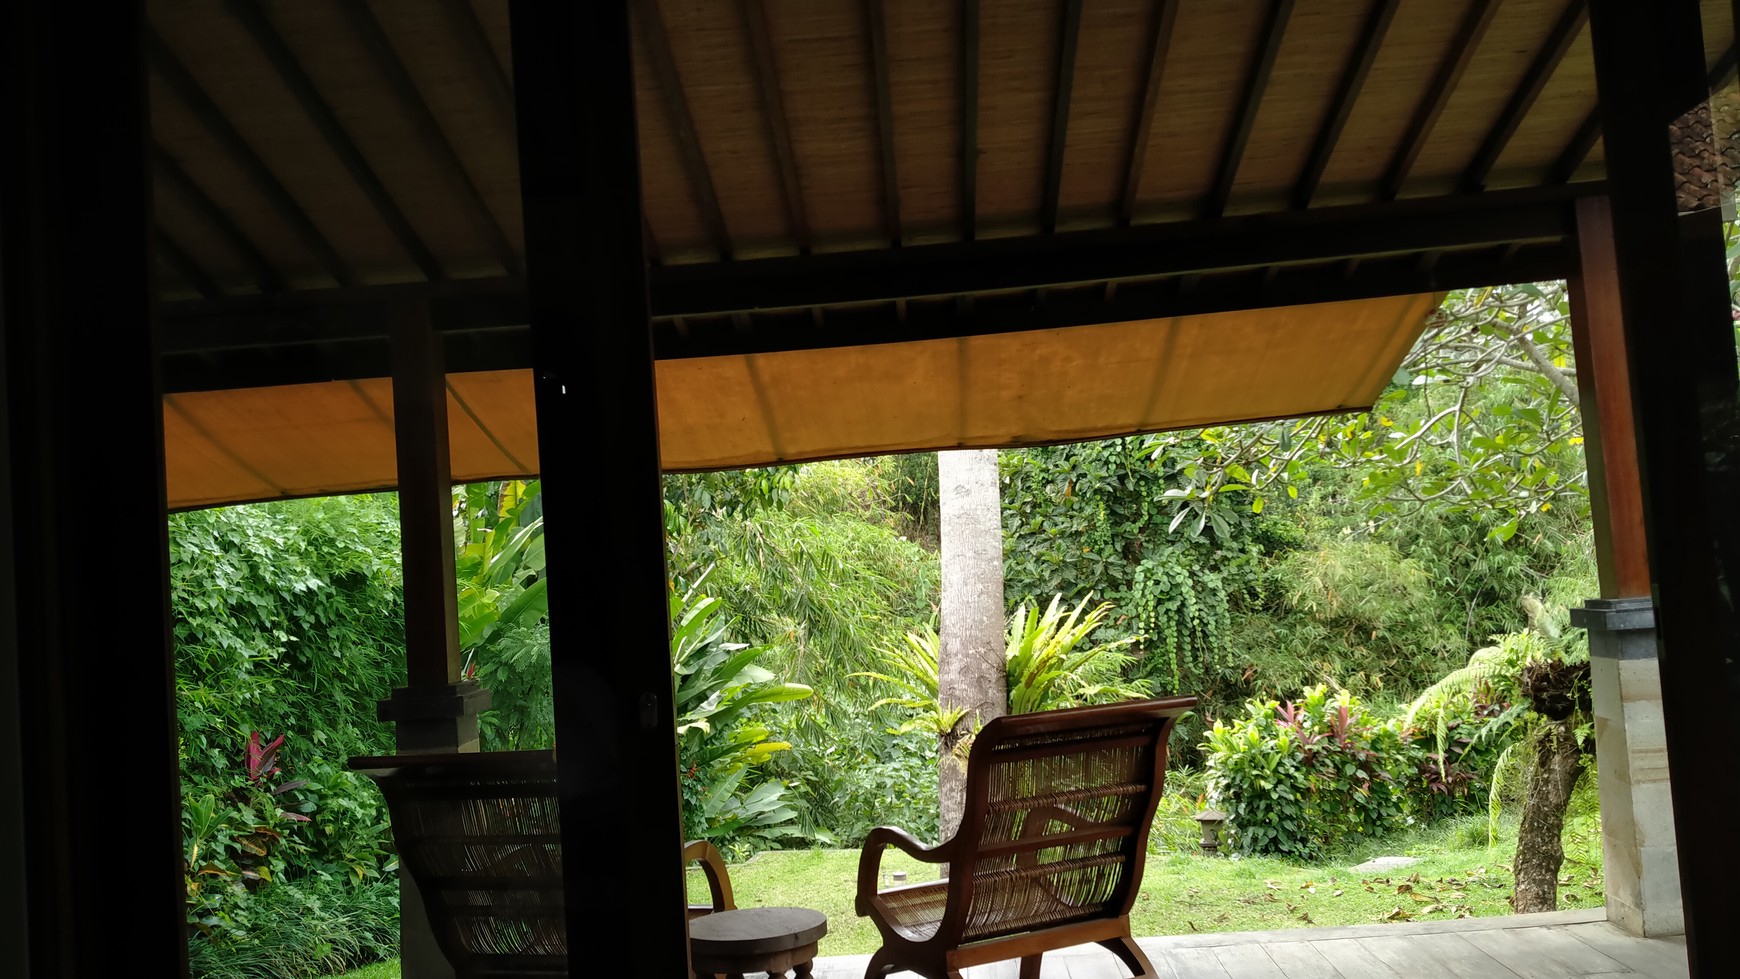 2 Bedroom Leasehold Villa for Sale with Lush Green Views - 10 Minutes from Ubud Center